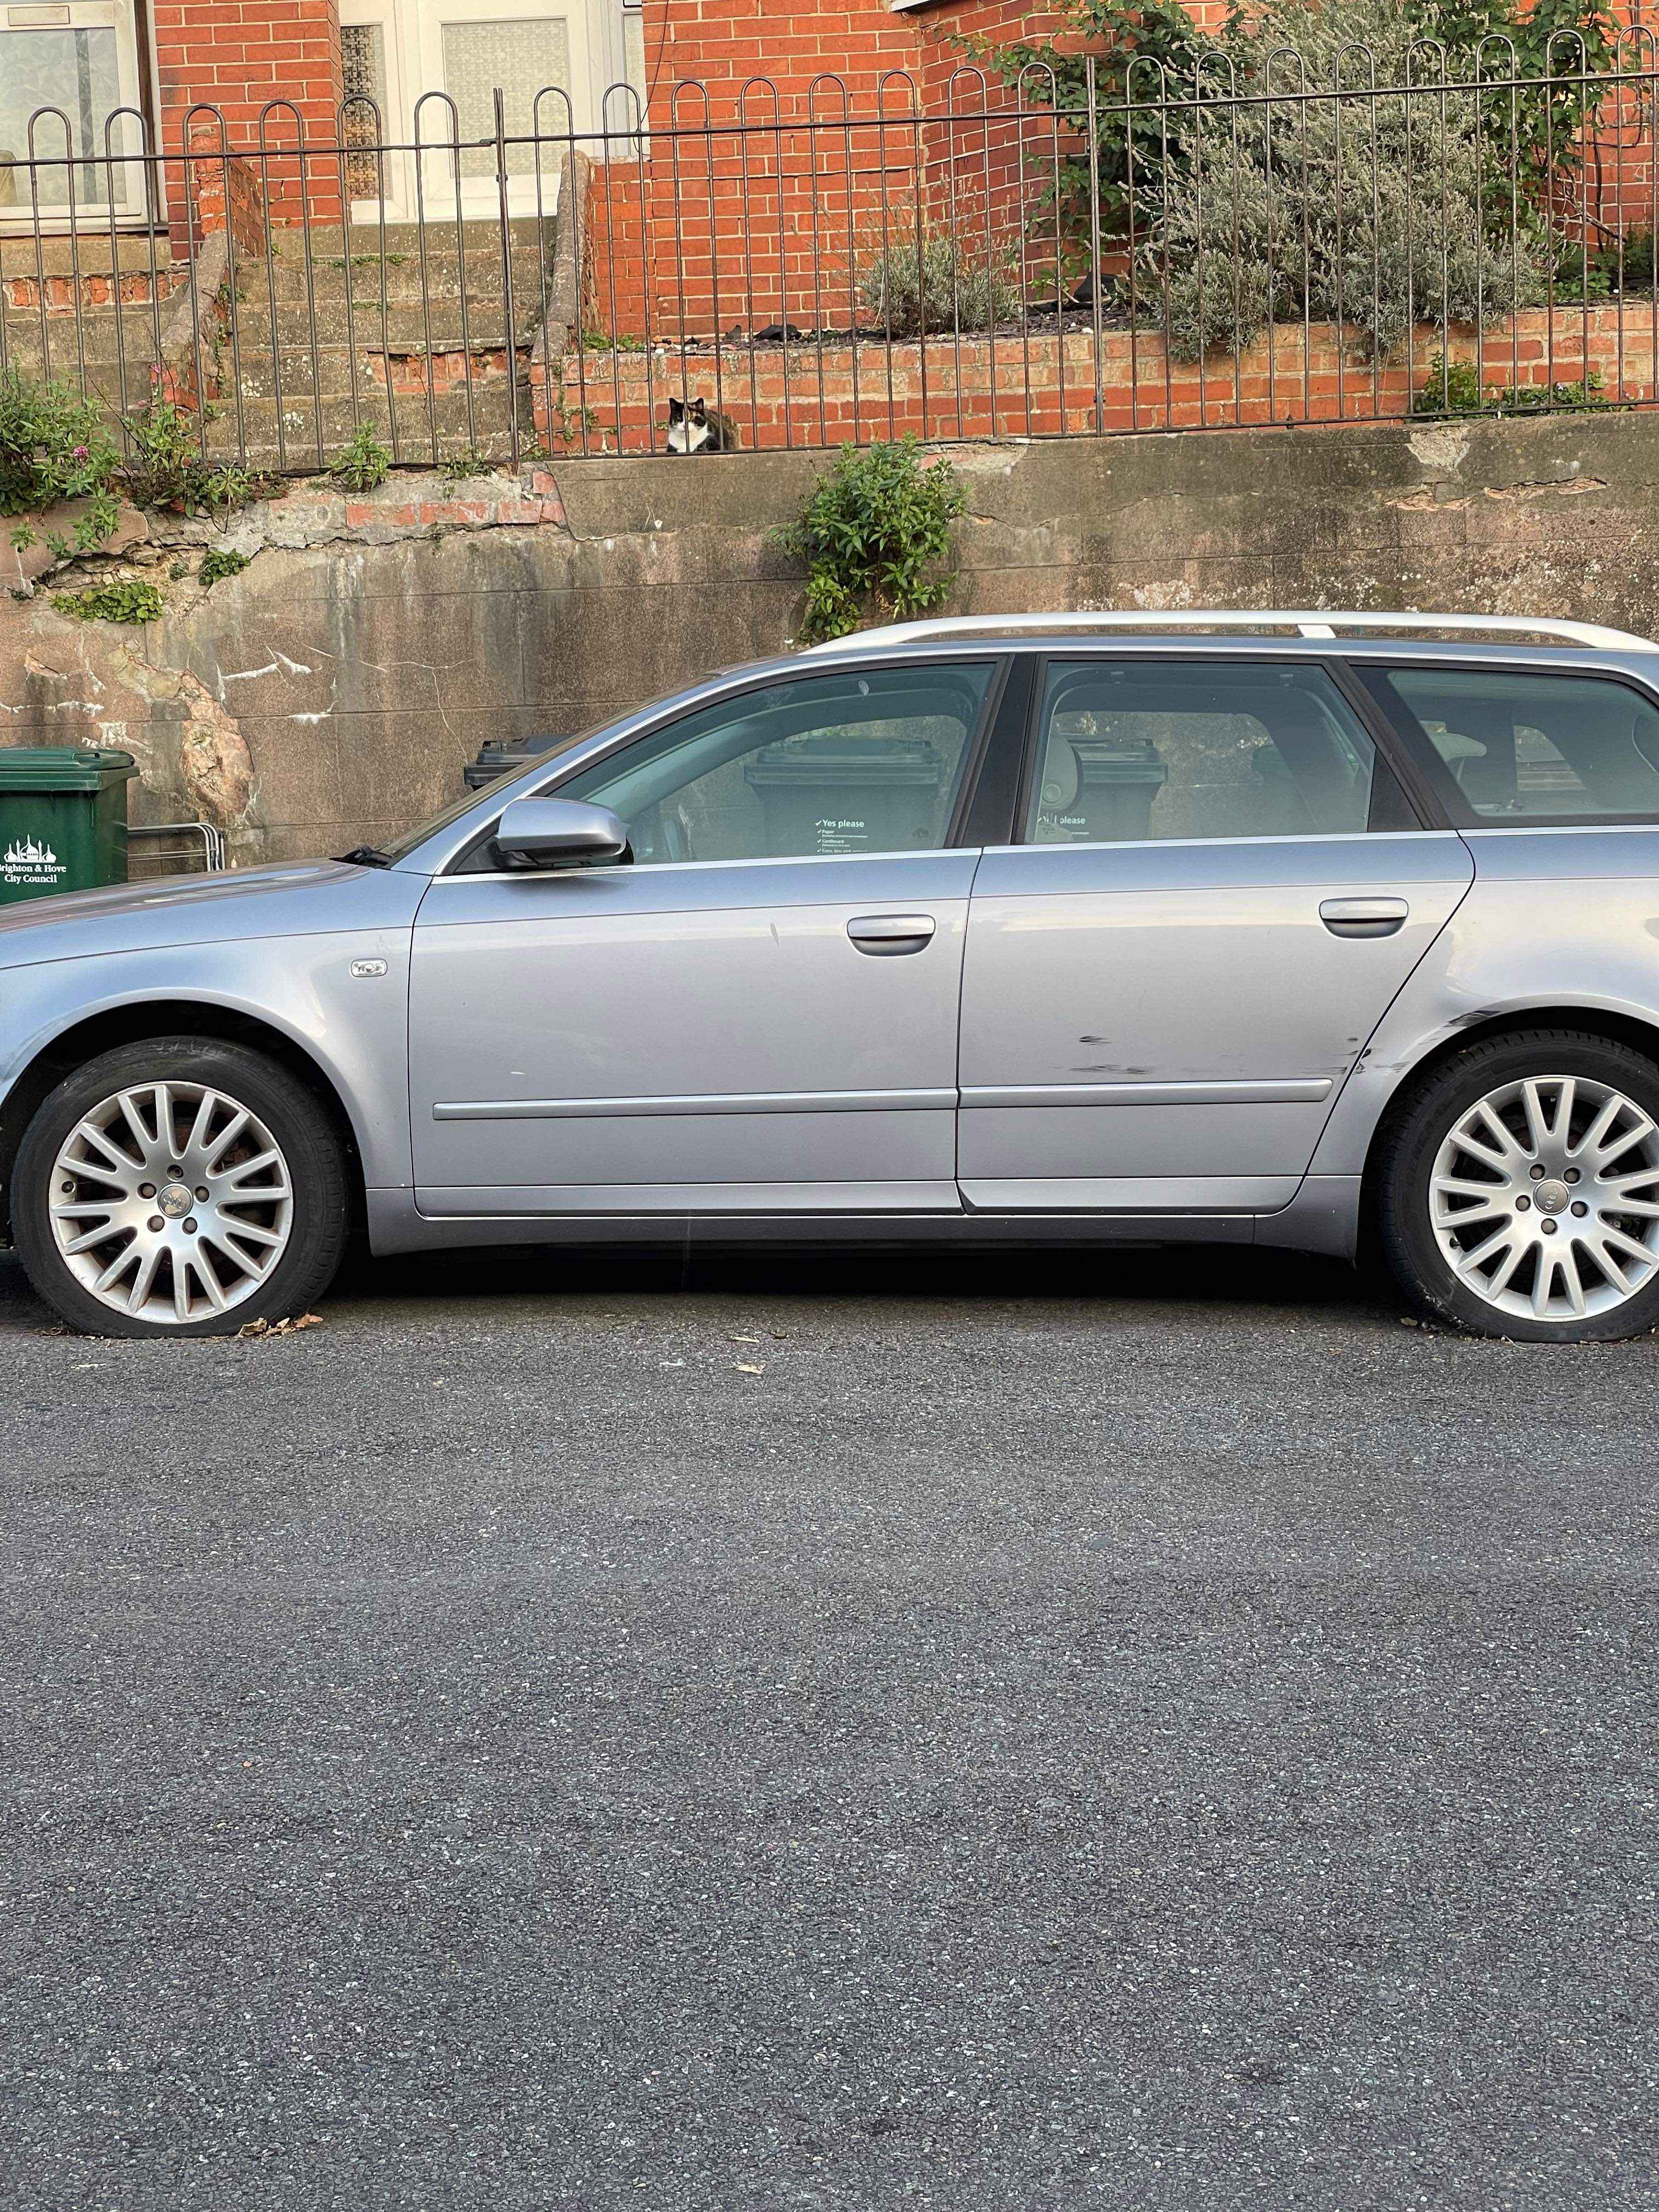 Photograph of FP55 XDV - a Silver Audi A4 parked in Hollingdean by a non-resident, and potentially abandoned. The second of two photographs supplied by the residents of Hollingdean.